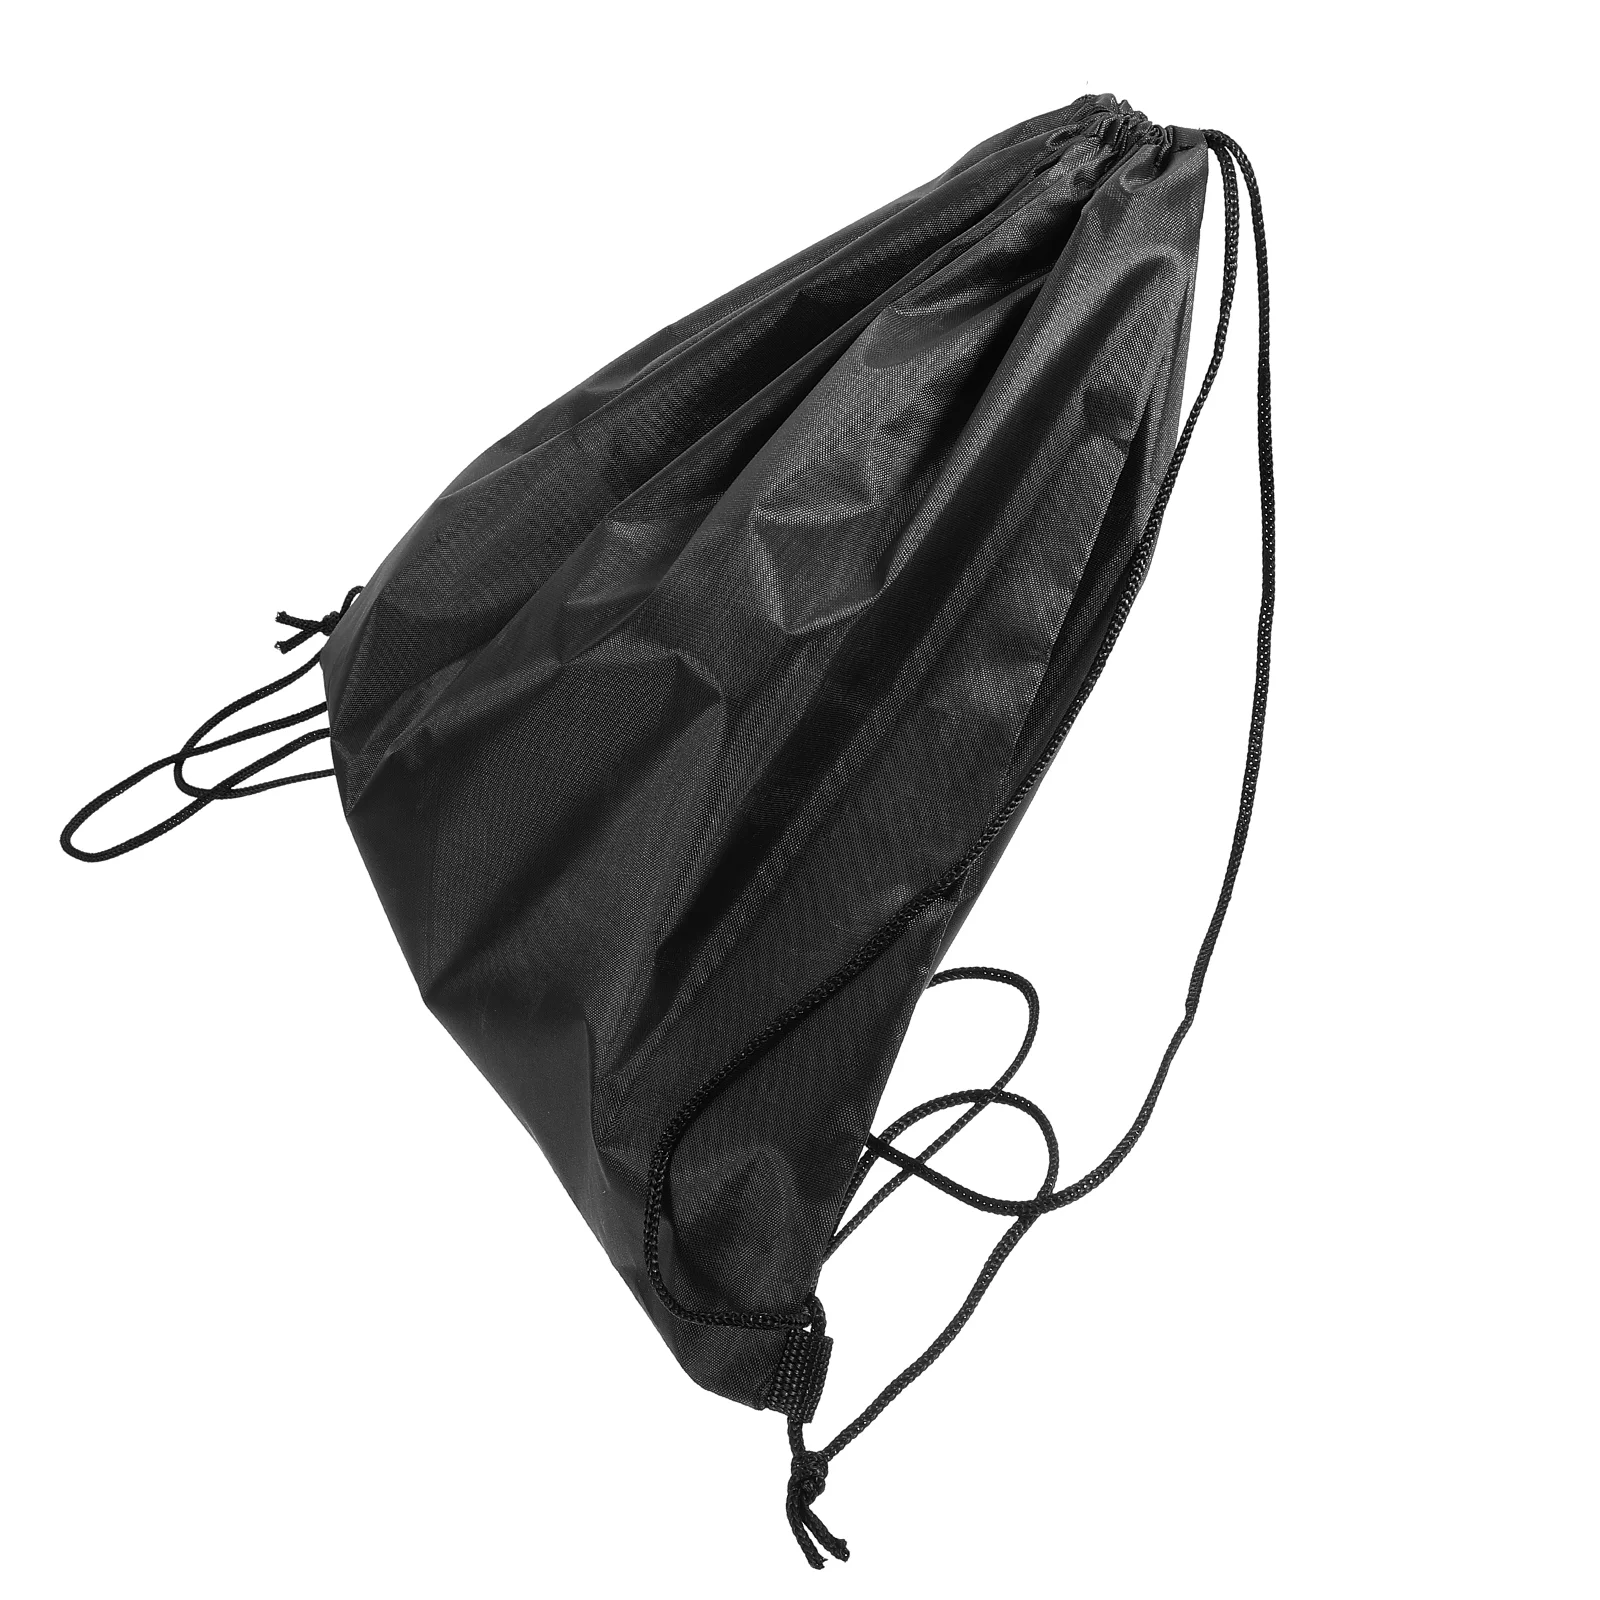 Portable Bag Drawstring Pouch Outdoor Motorcycle Storage Bag цена и фото